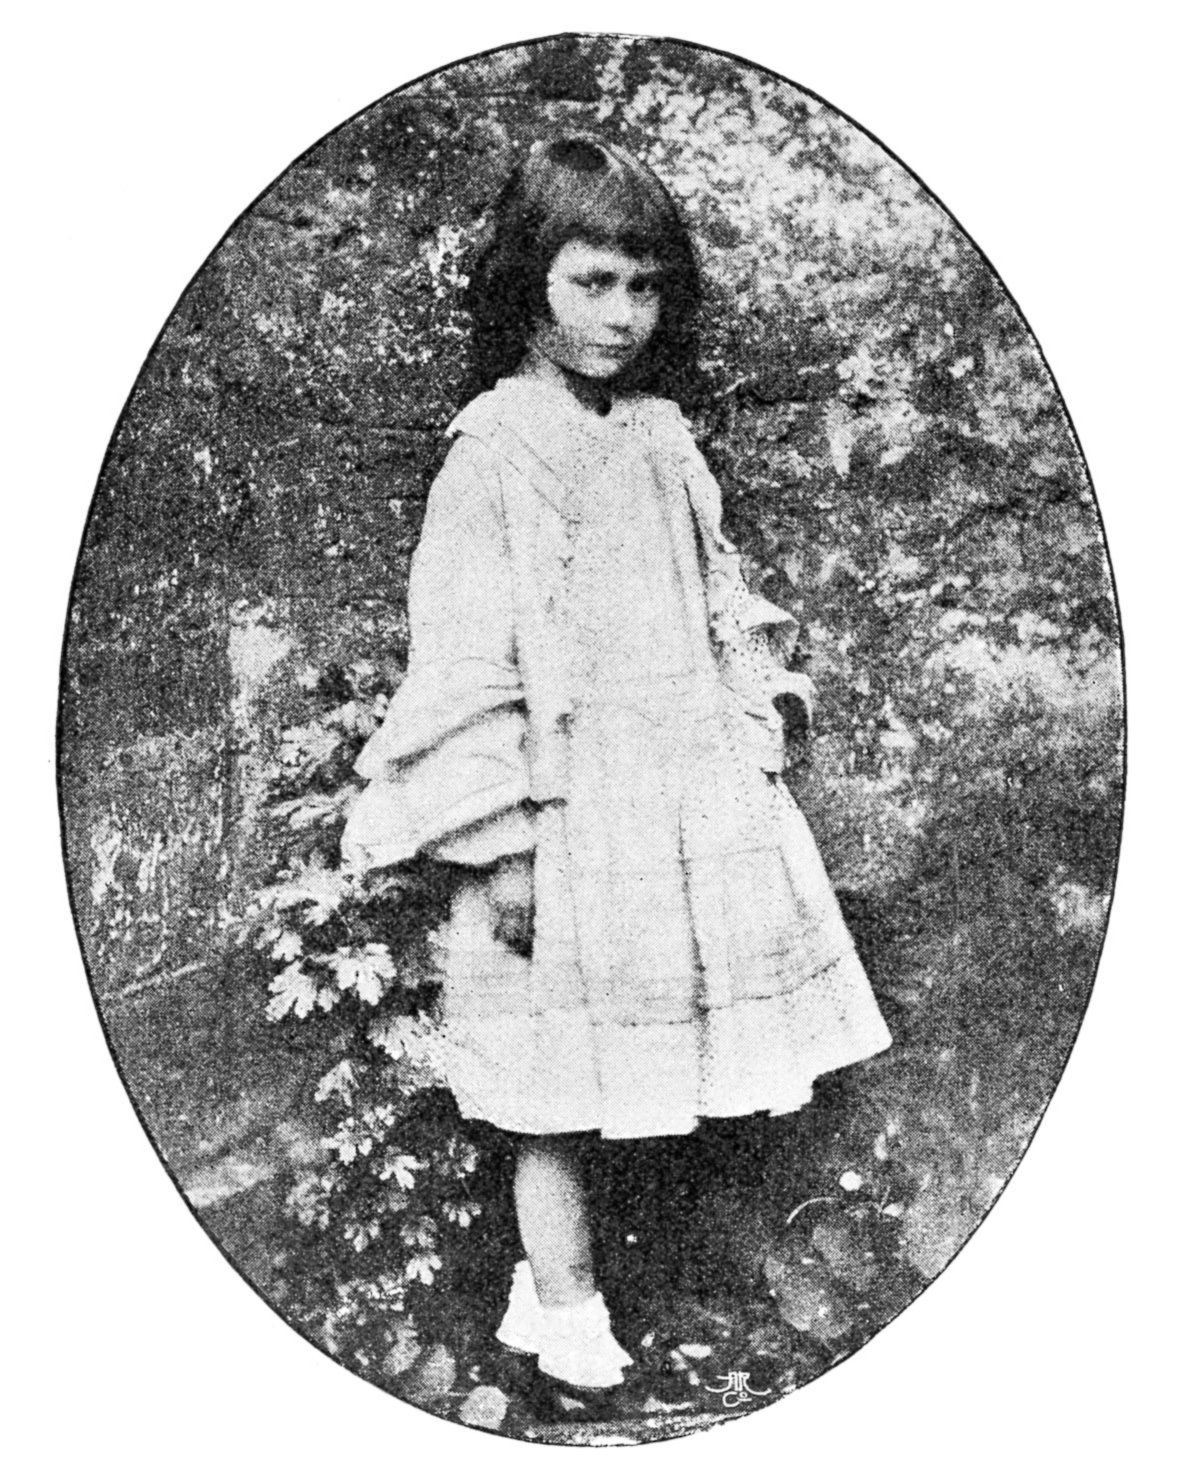 PHOTO: Reverend Charles Dodgson took this photo of Alice Liddell who inspired the story that came to be known as "Alice in Wonderland" in 1858.